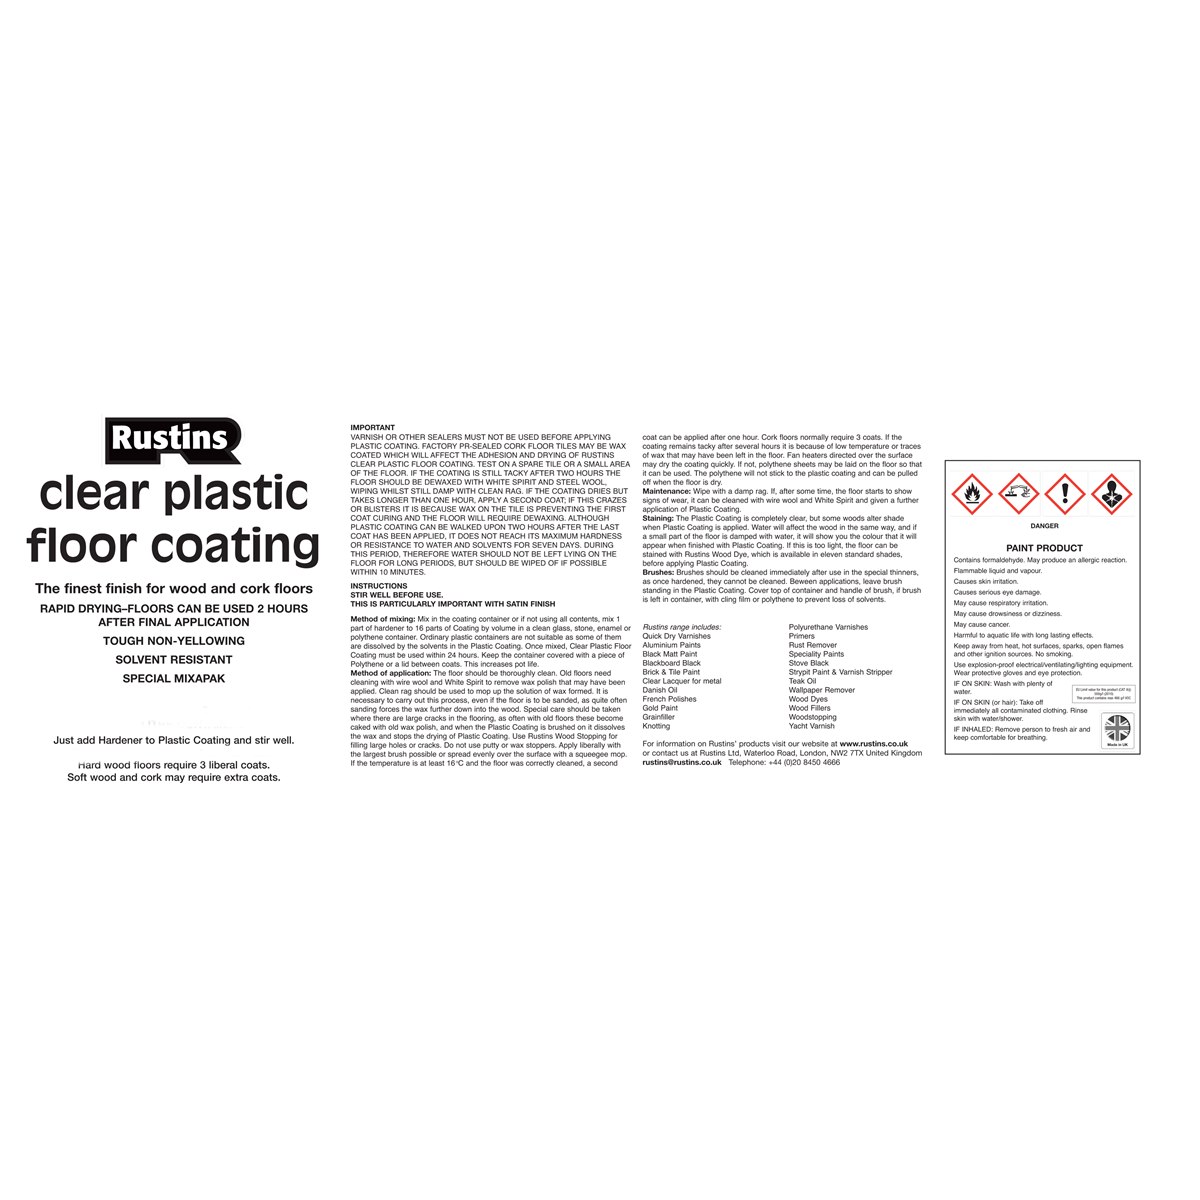 Where to Buy Rustins Clear Plastic Floor Coating Gloss 